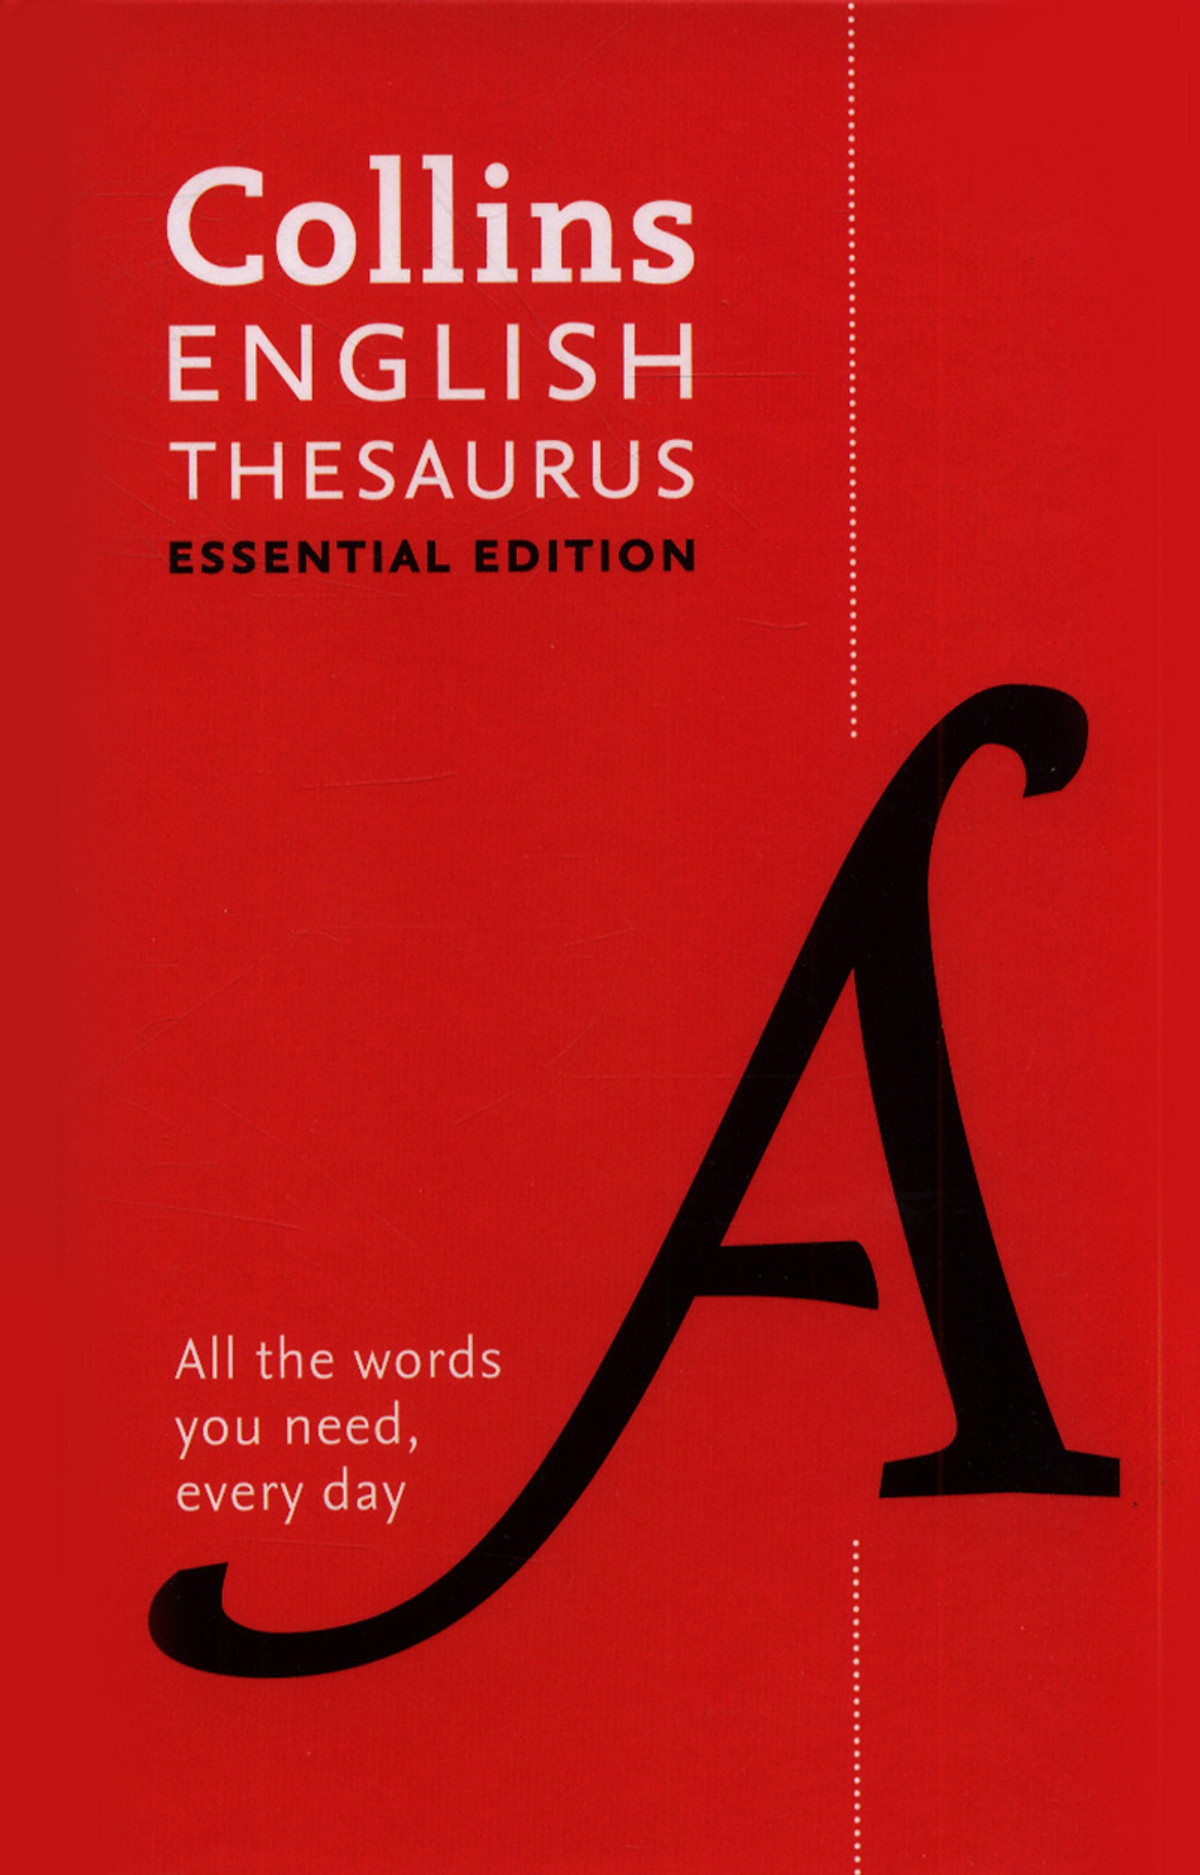 Collins English Thesaurus: All The Words You Need Every Day (Essential Edition) (2nd Edition)